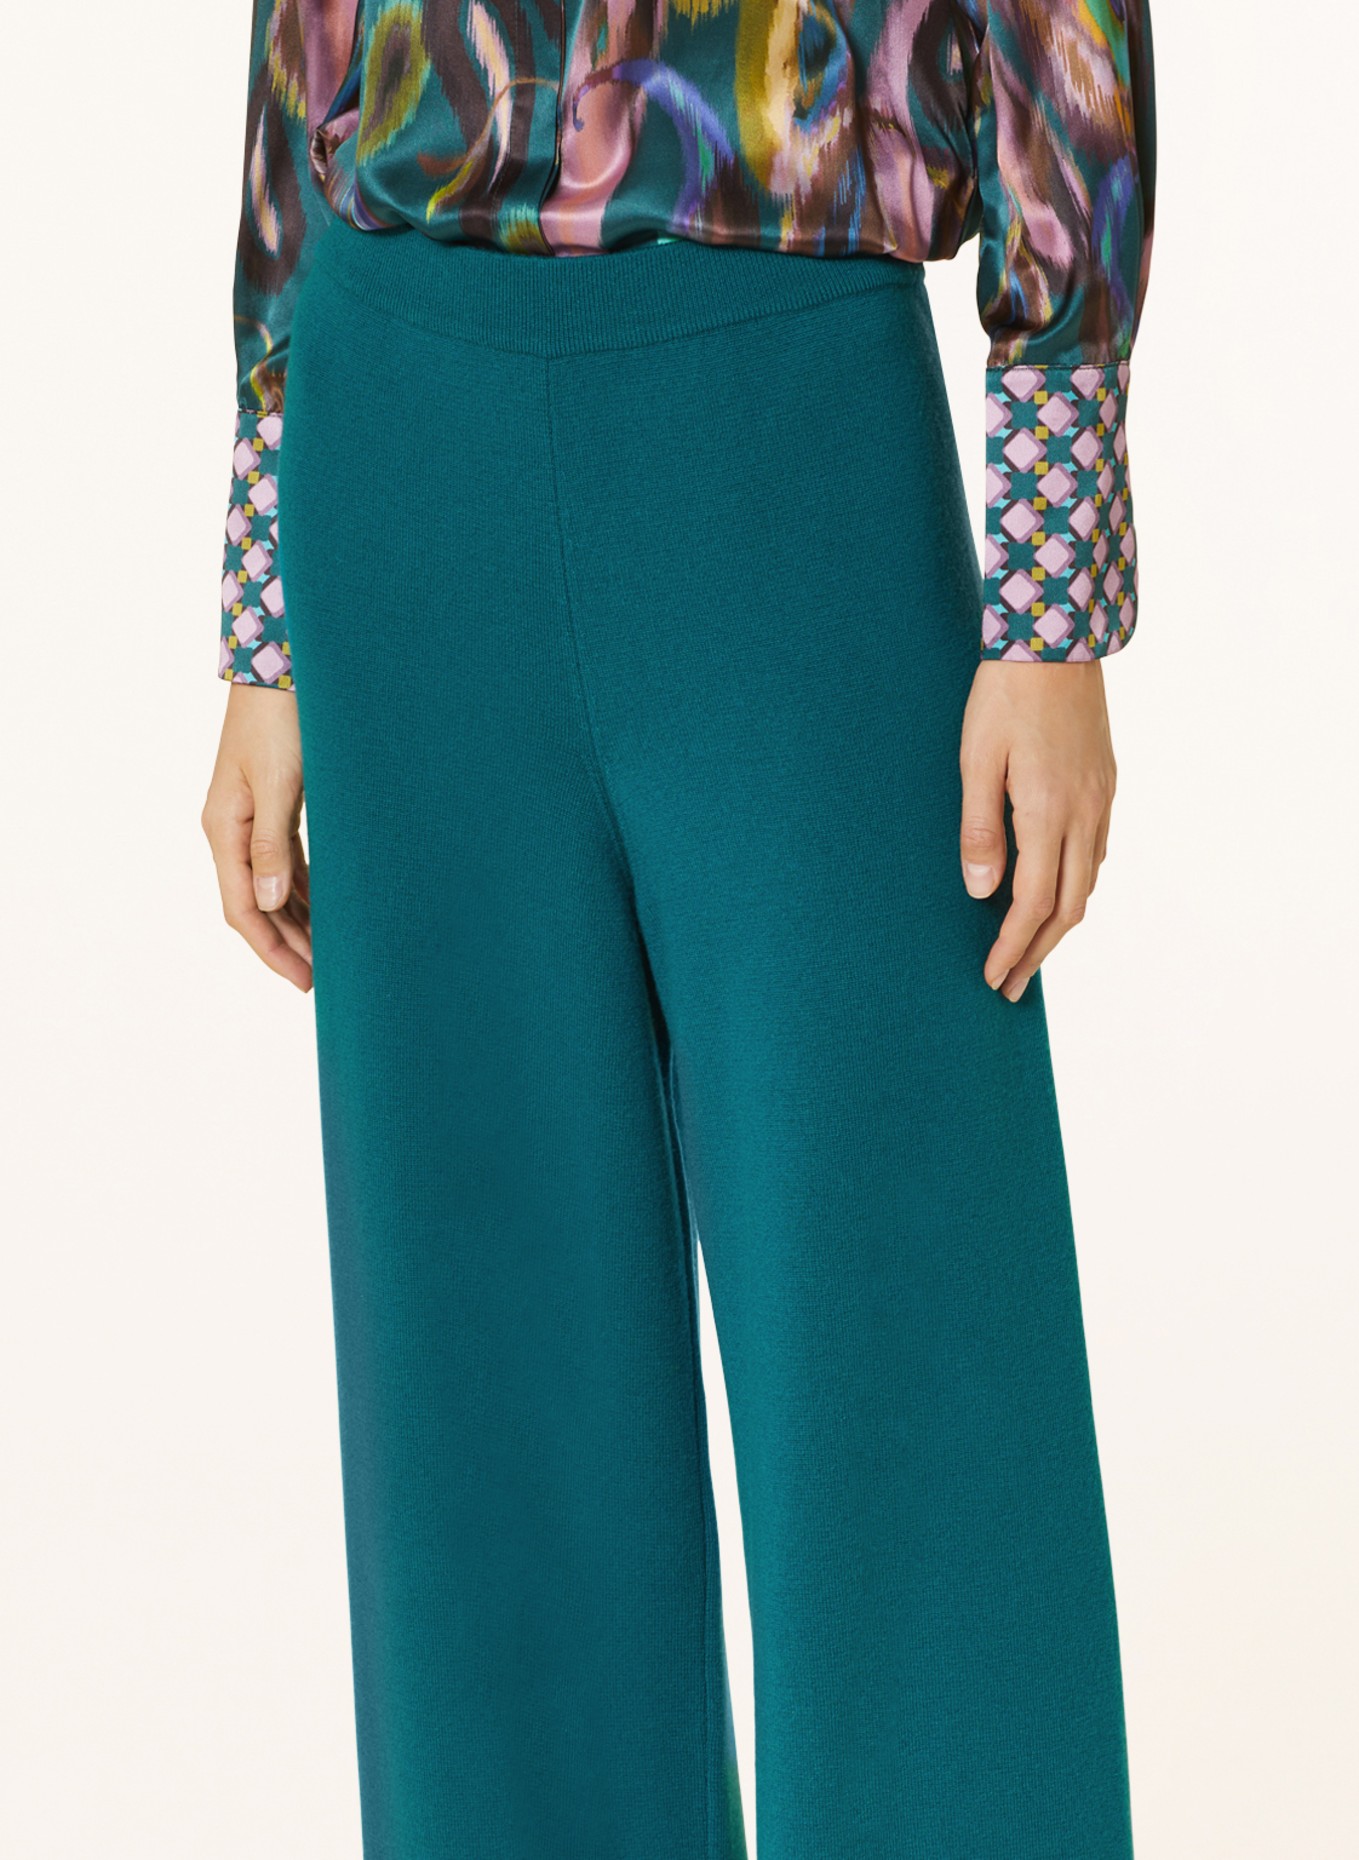 SEM PER LEI Knit trousers with cashmere, Color: TEAL (Image 5)